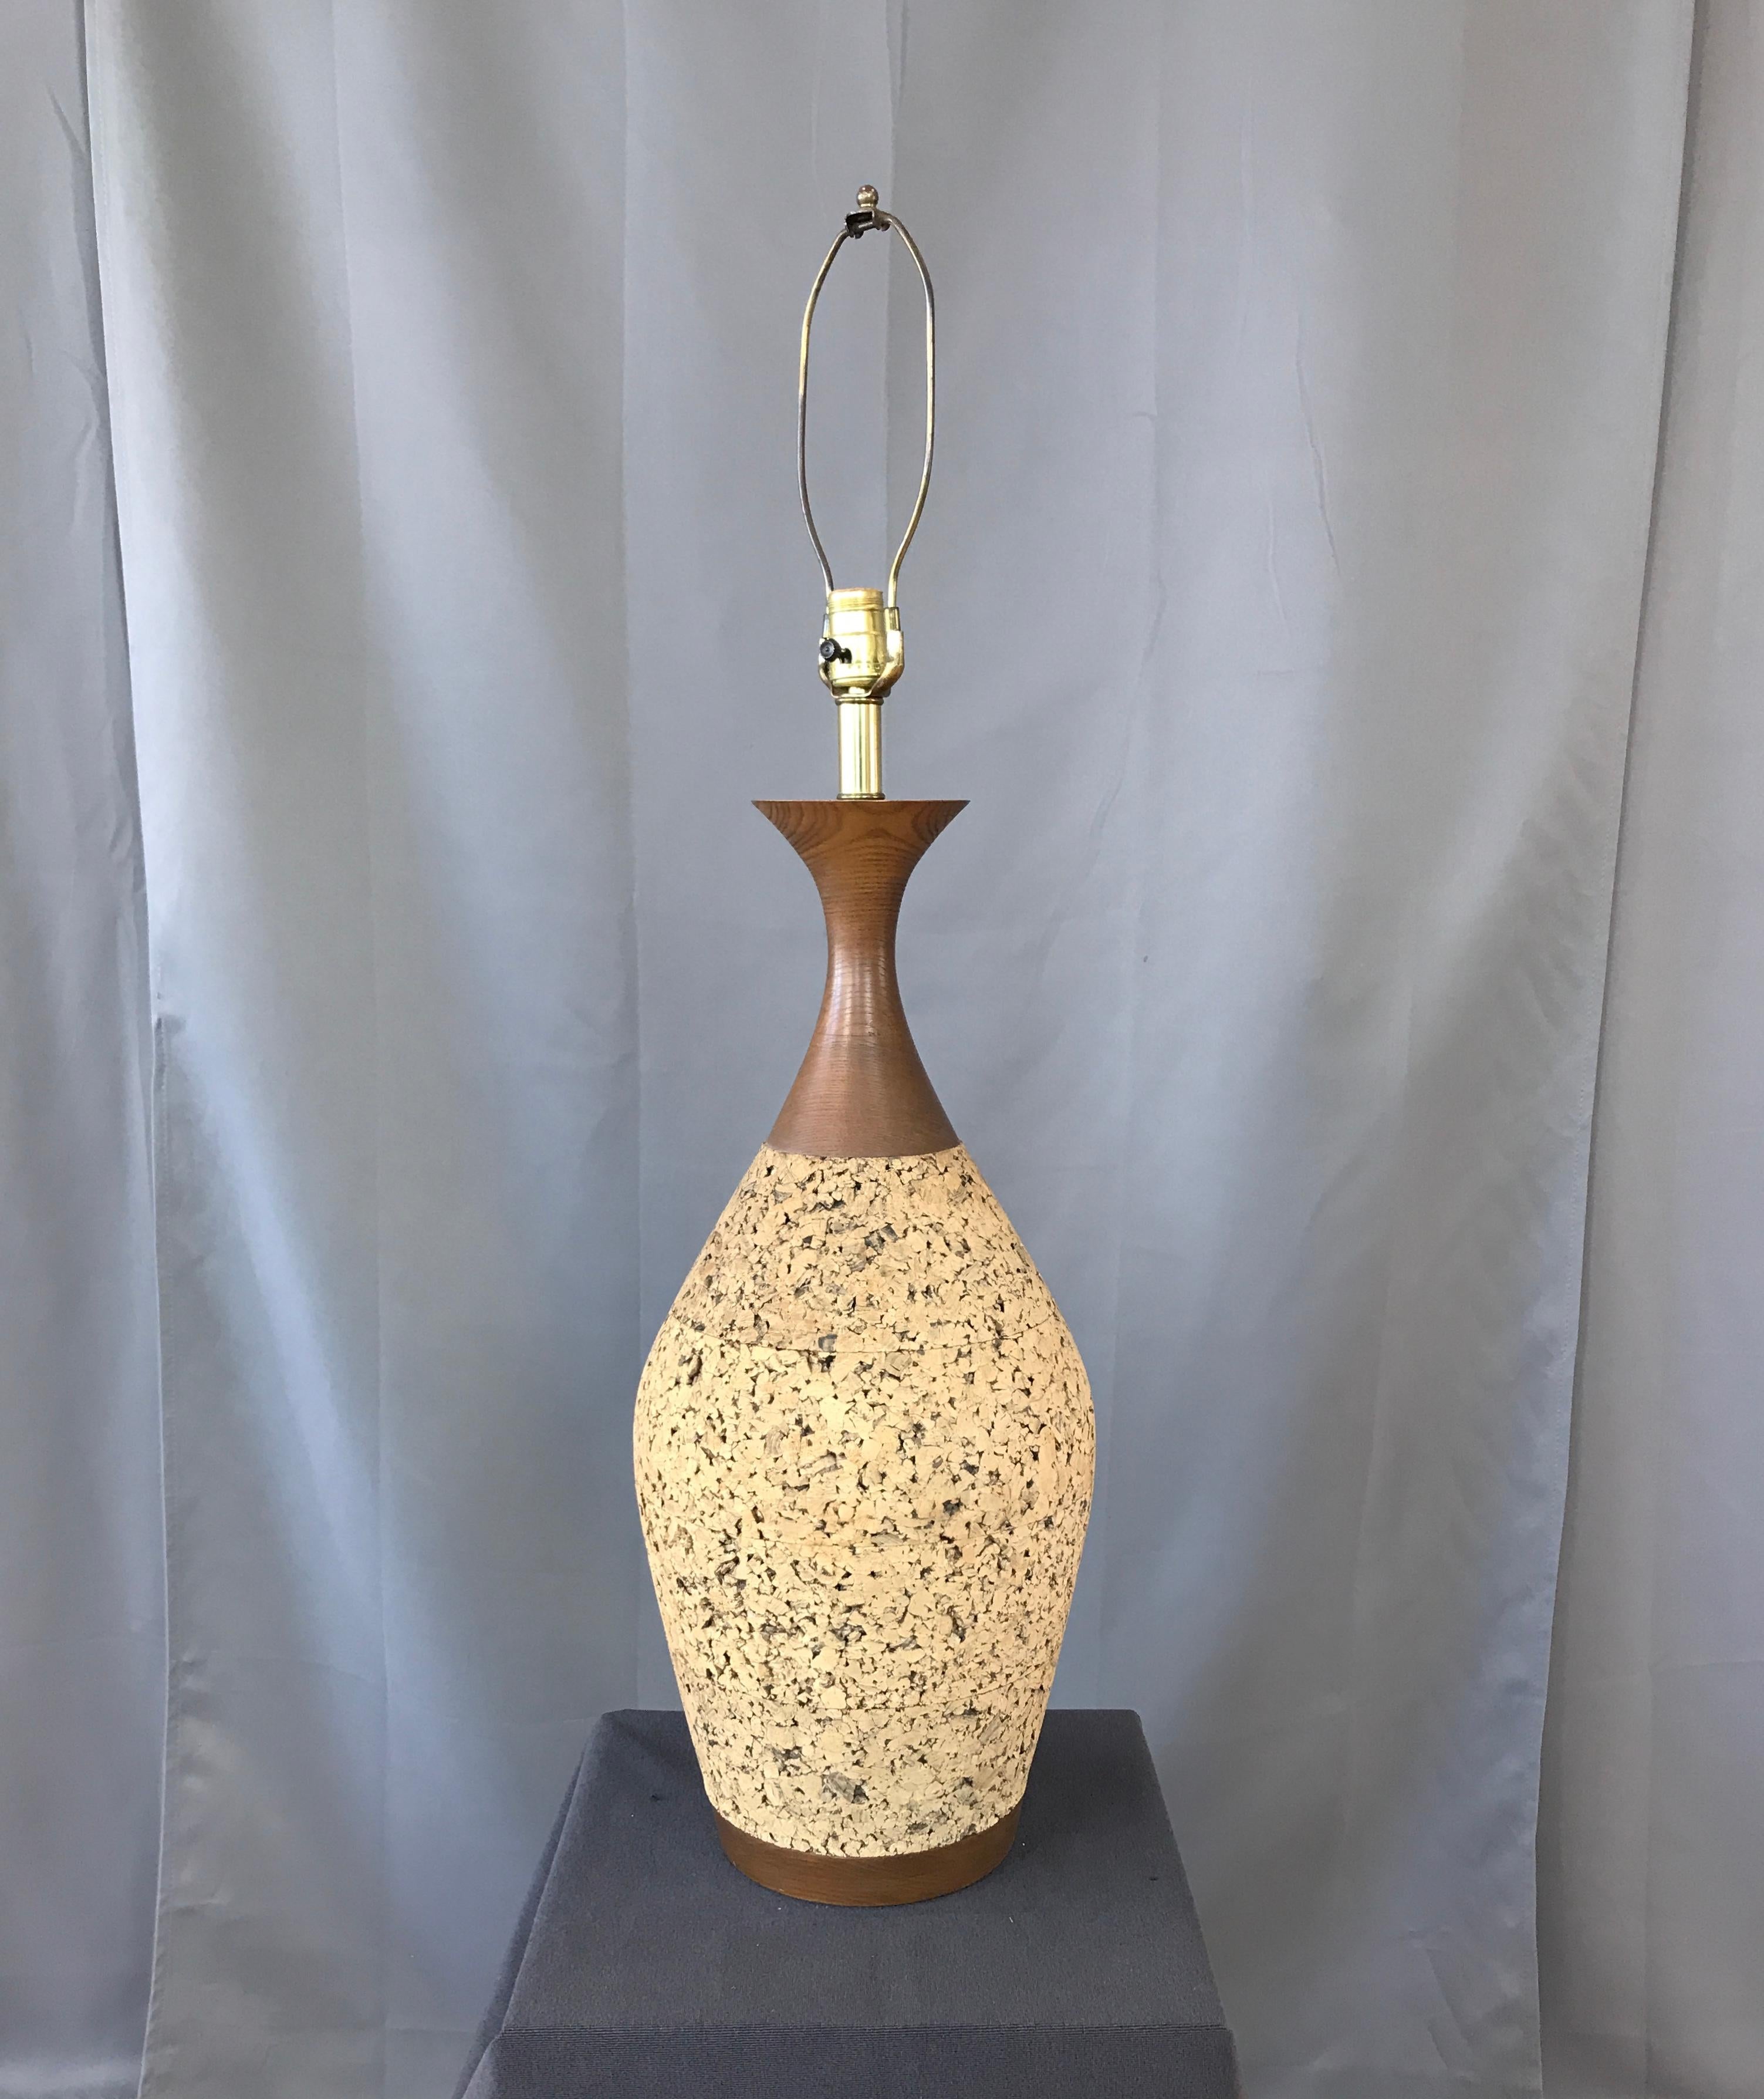 Monumental 1970s cork table lamp. Curvy walnut stain neck, and base, with a huge cork body in-between. With its original large lamp shade that's in wonderful condition.

Measurement below is to the top of its shade.
30 1/4 inches to top of its